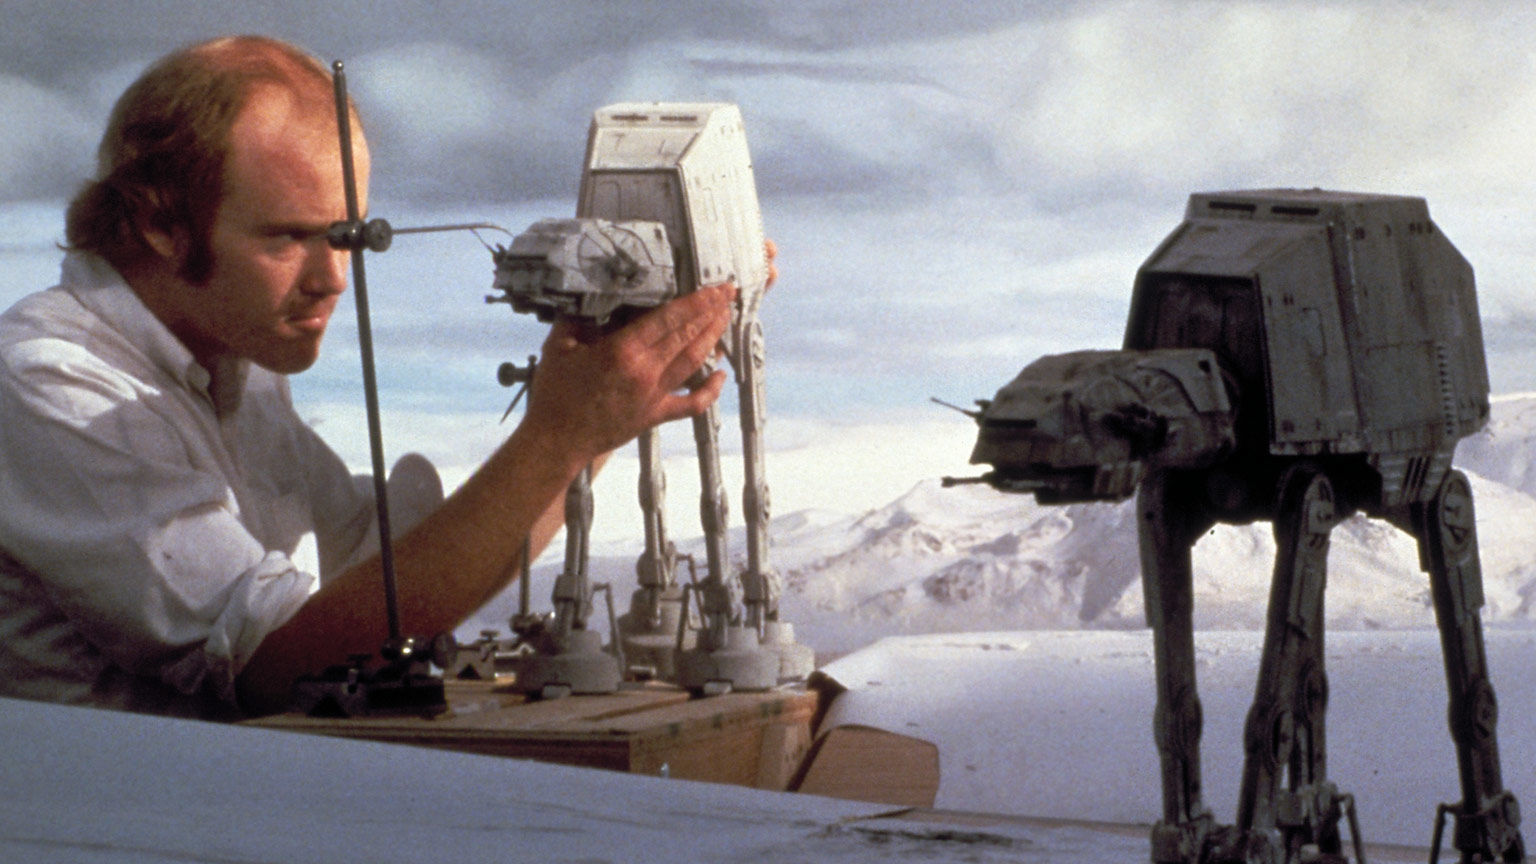 How The Empire Strikes Back made those AT-ATs look so real | SYFY WIRE